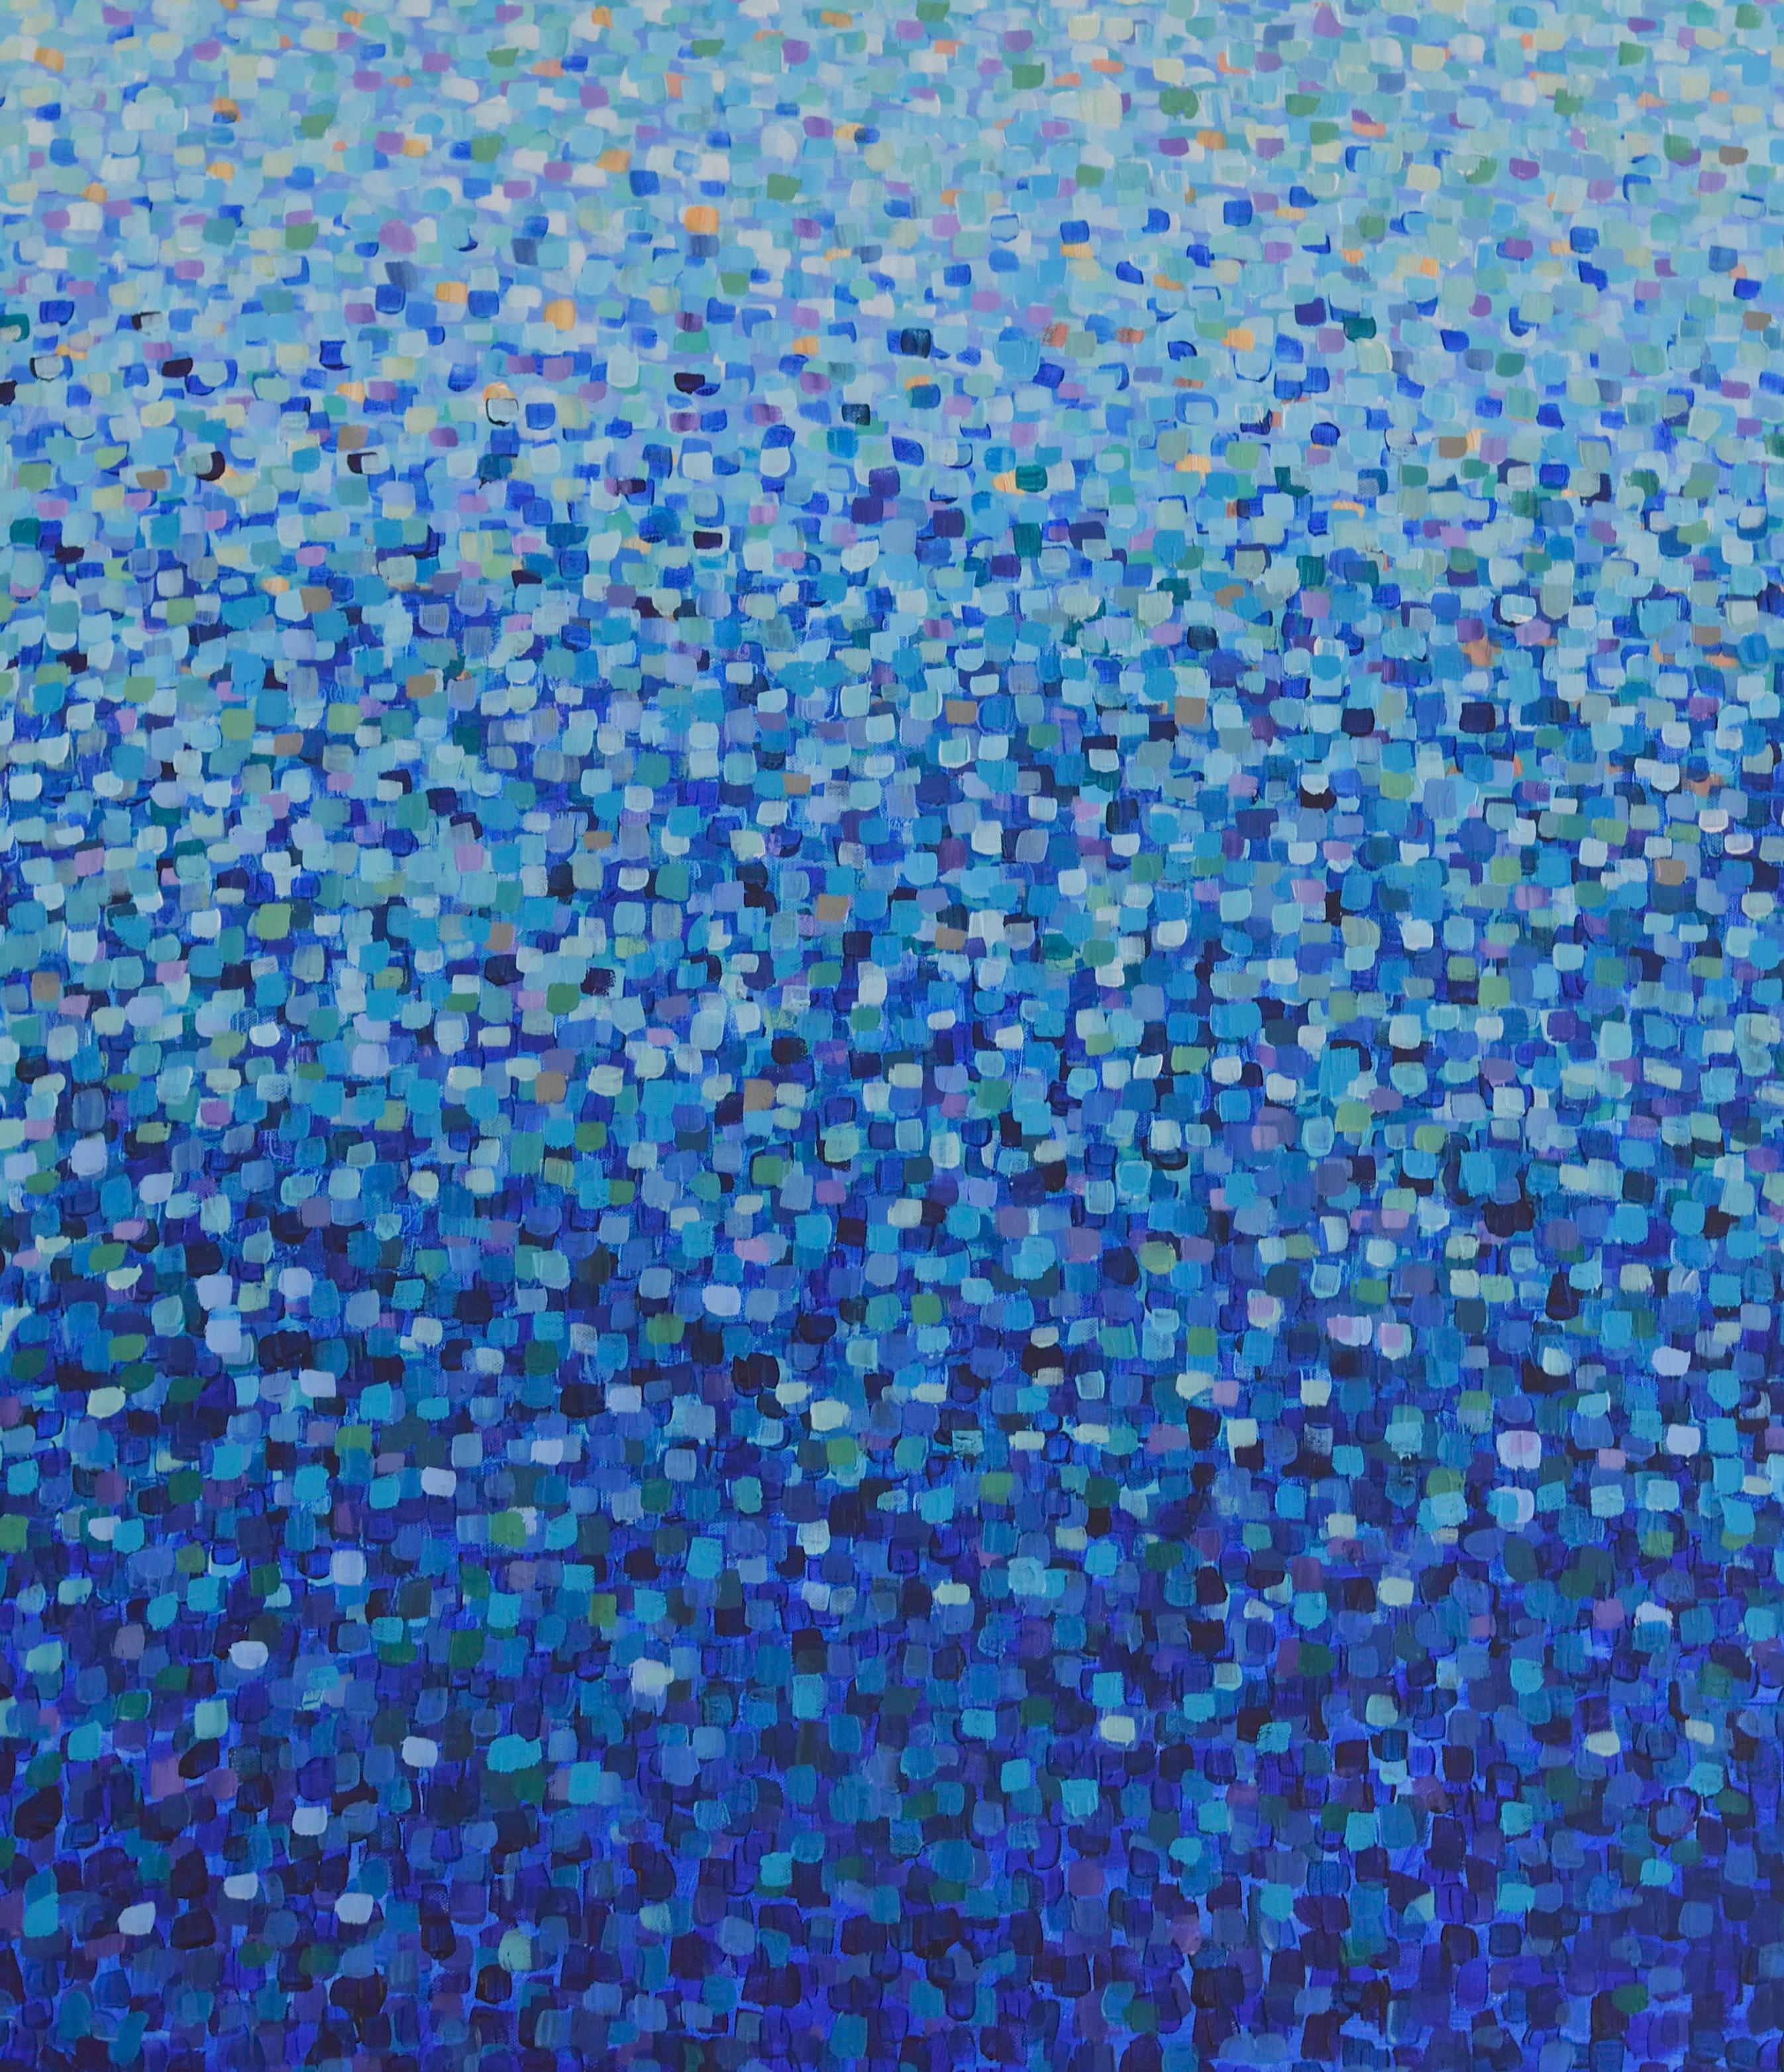 Artist Commentary:
Ripples an original abstract landscape, memories  slowly rippling to the other side, floating in space.

Keywords: blue, blues, painterly, impressionism, impressionist, gradient, multi dot, dotted, dots,

Artist Biography: 
With a